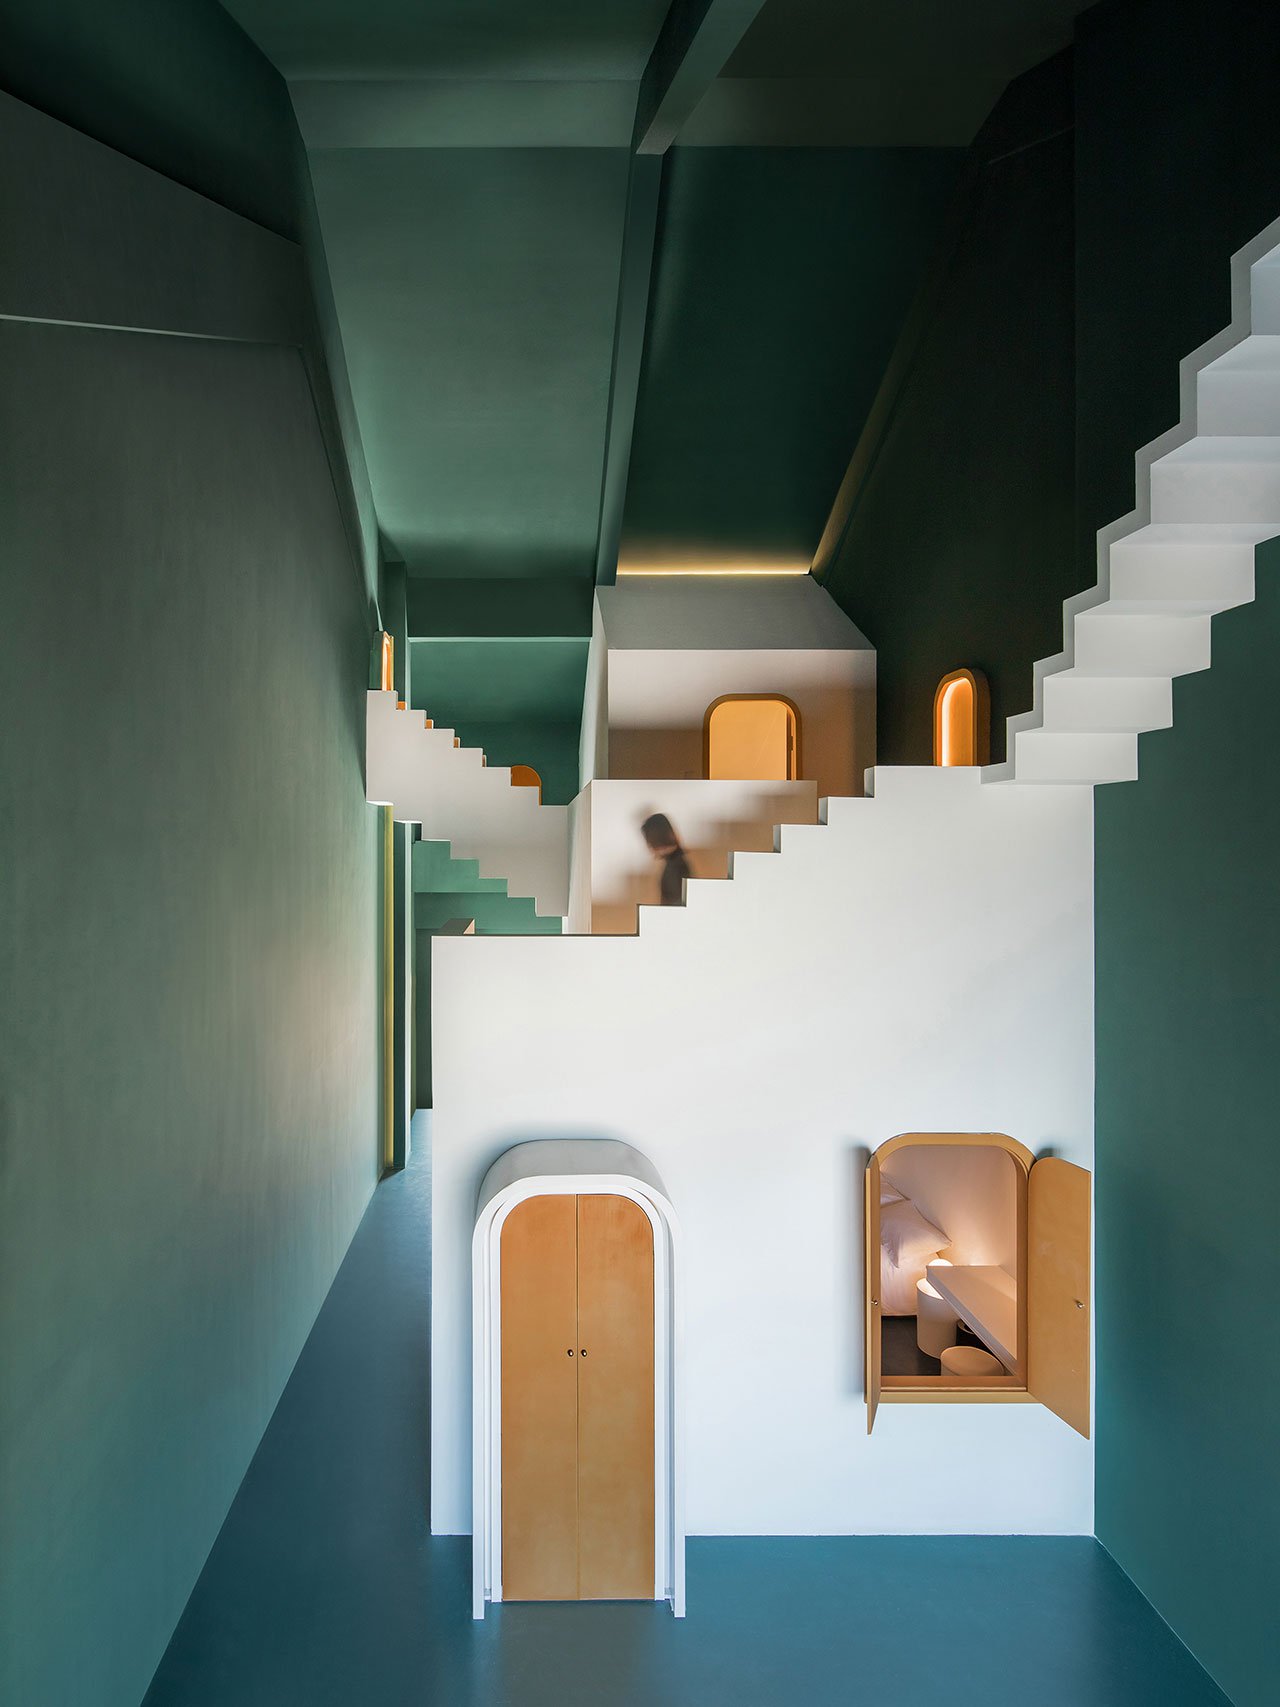 These Surreal Guesthouses with Impossible Staircases Have Alice in Wonderland Vibes